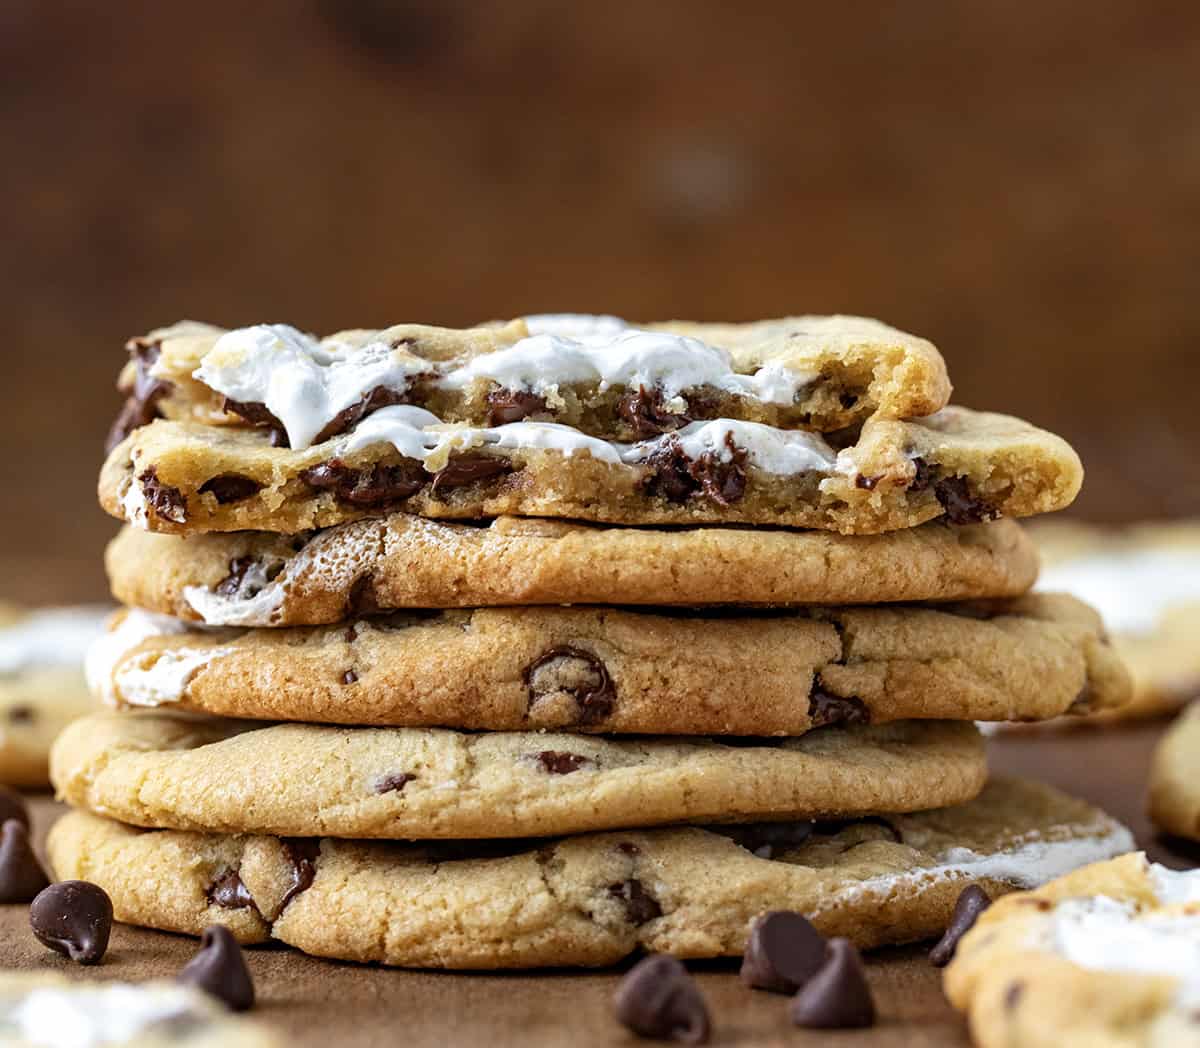 Stack of Marshmallow Chocolate Chip Cookies with the top cookie broken in half showing chewy texture.